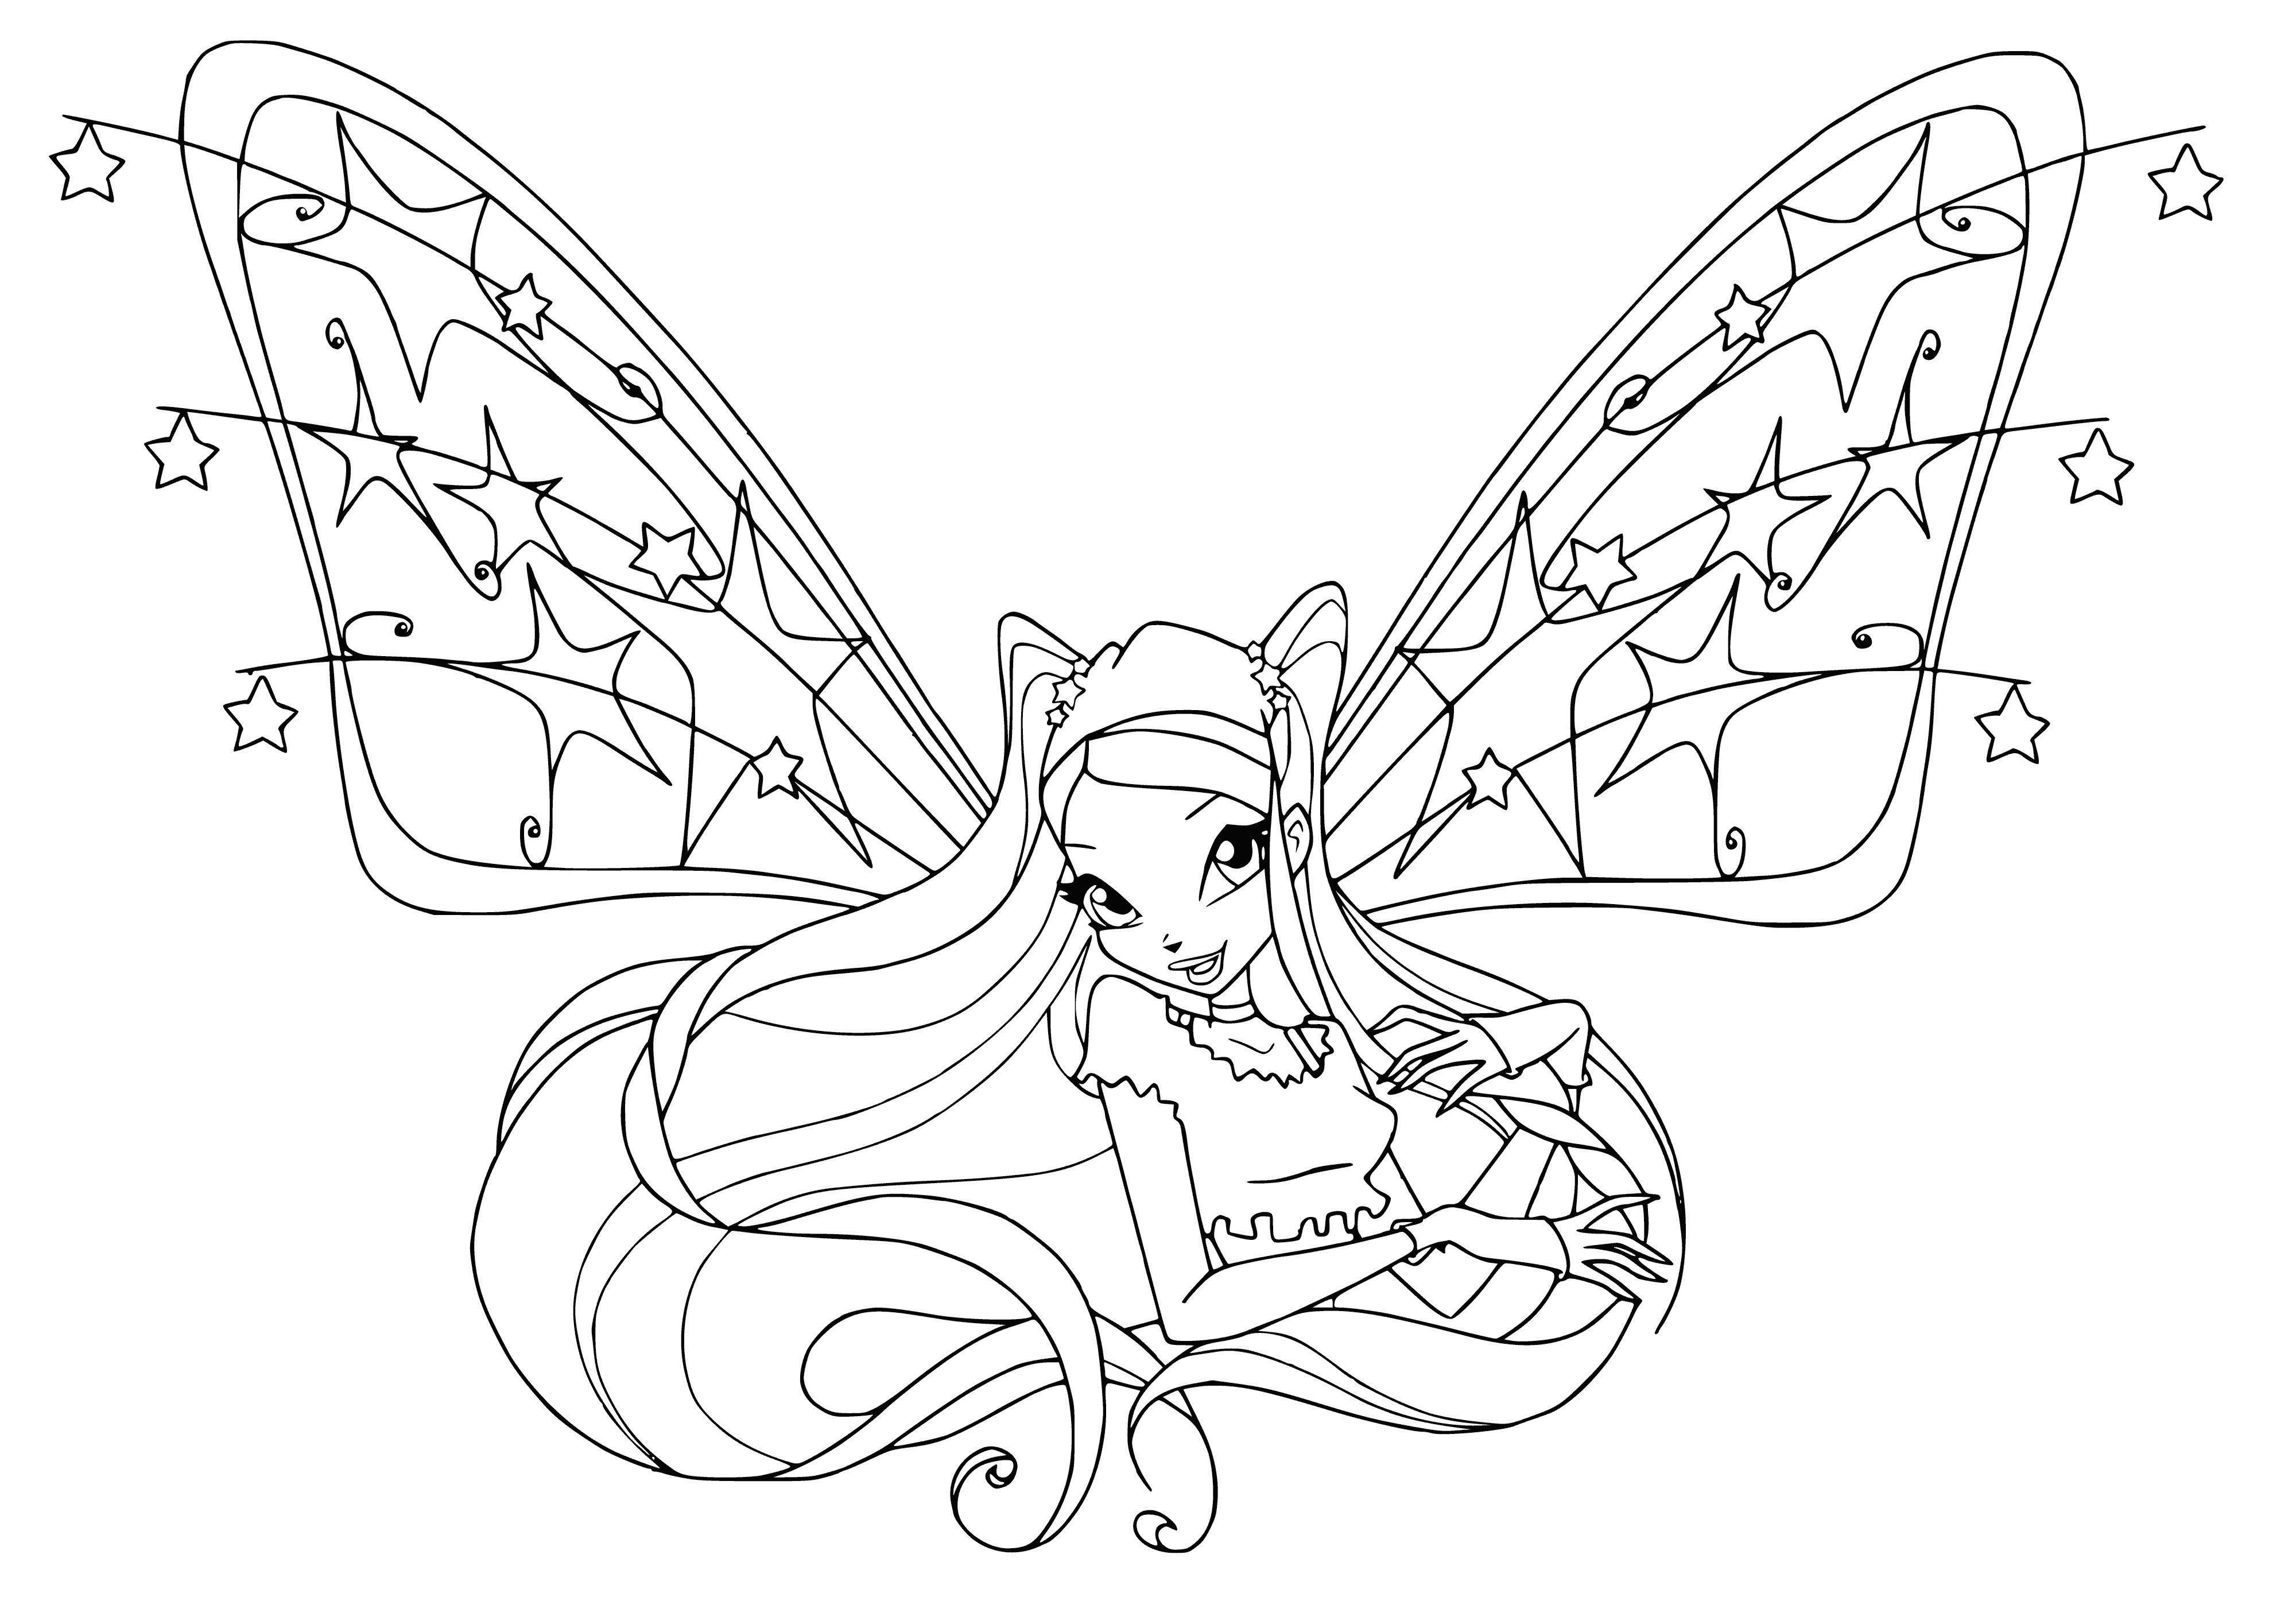 coloring page: Fairy Stella is flying with her wand, surrounded by a colorful aura. #FairyStella #BelievixWand #ColoringPage